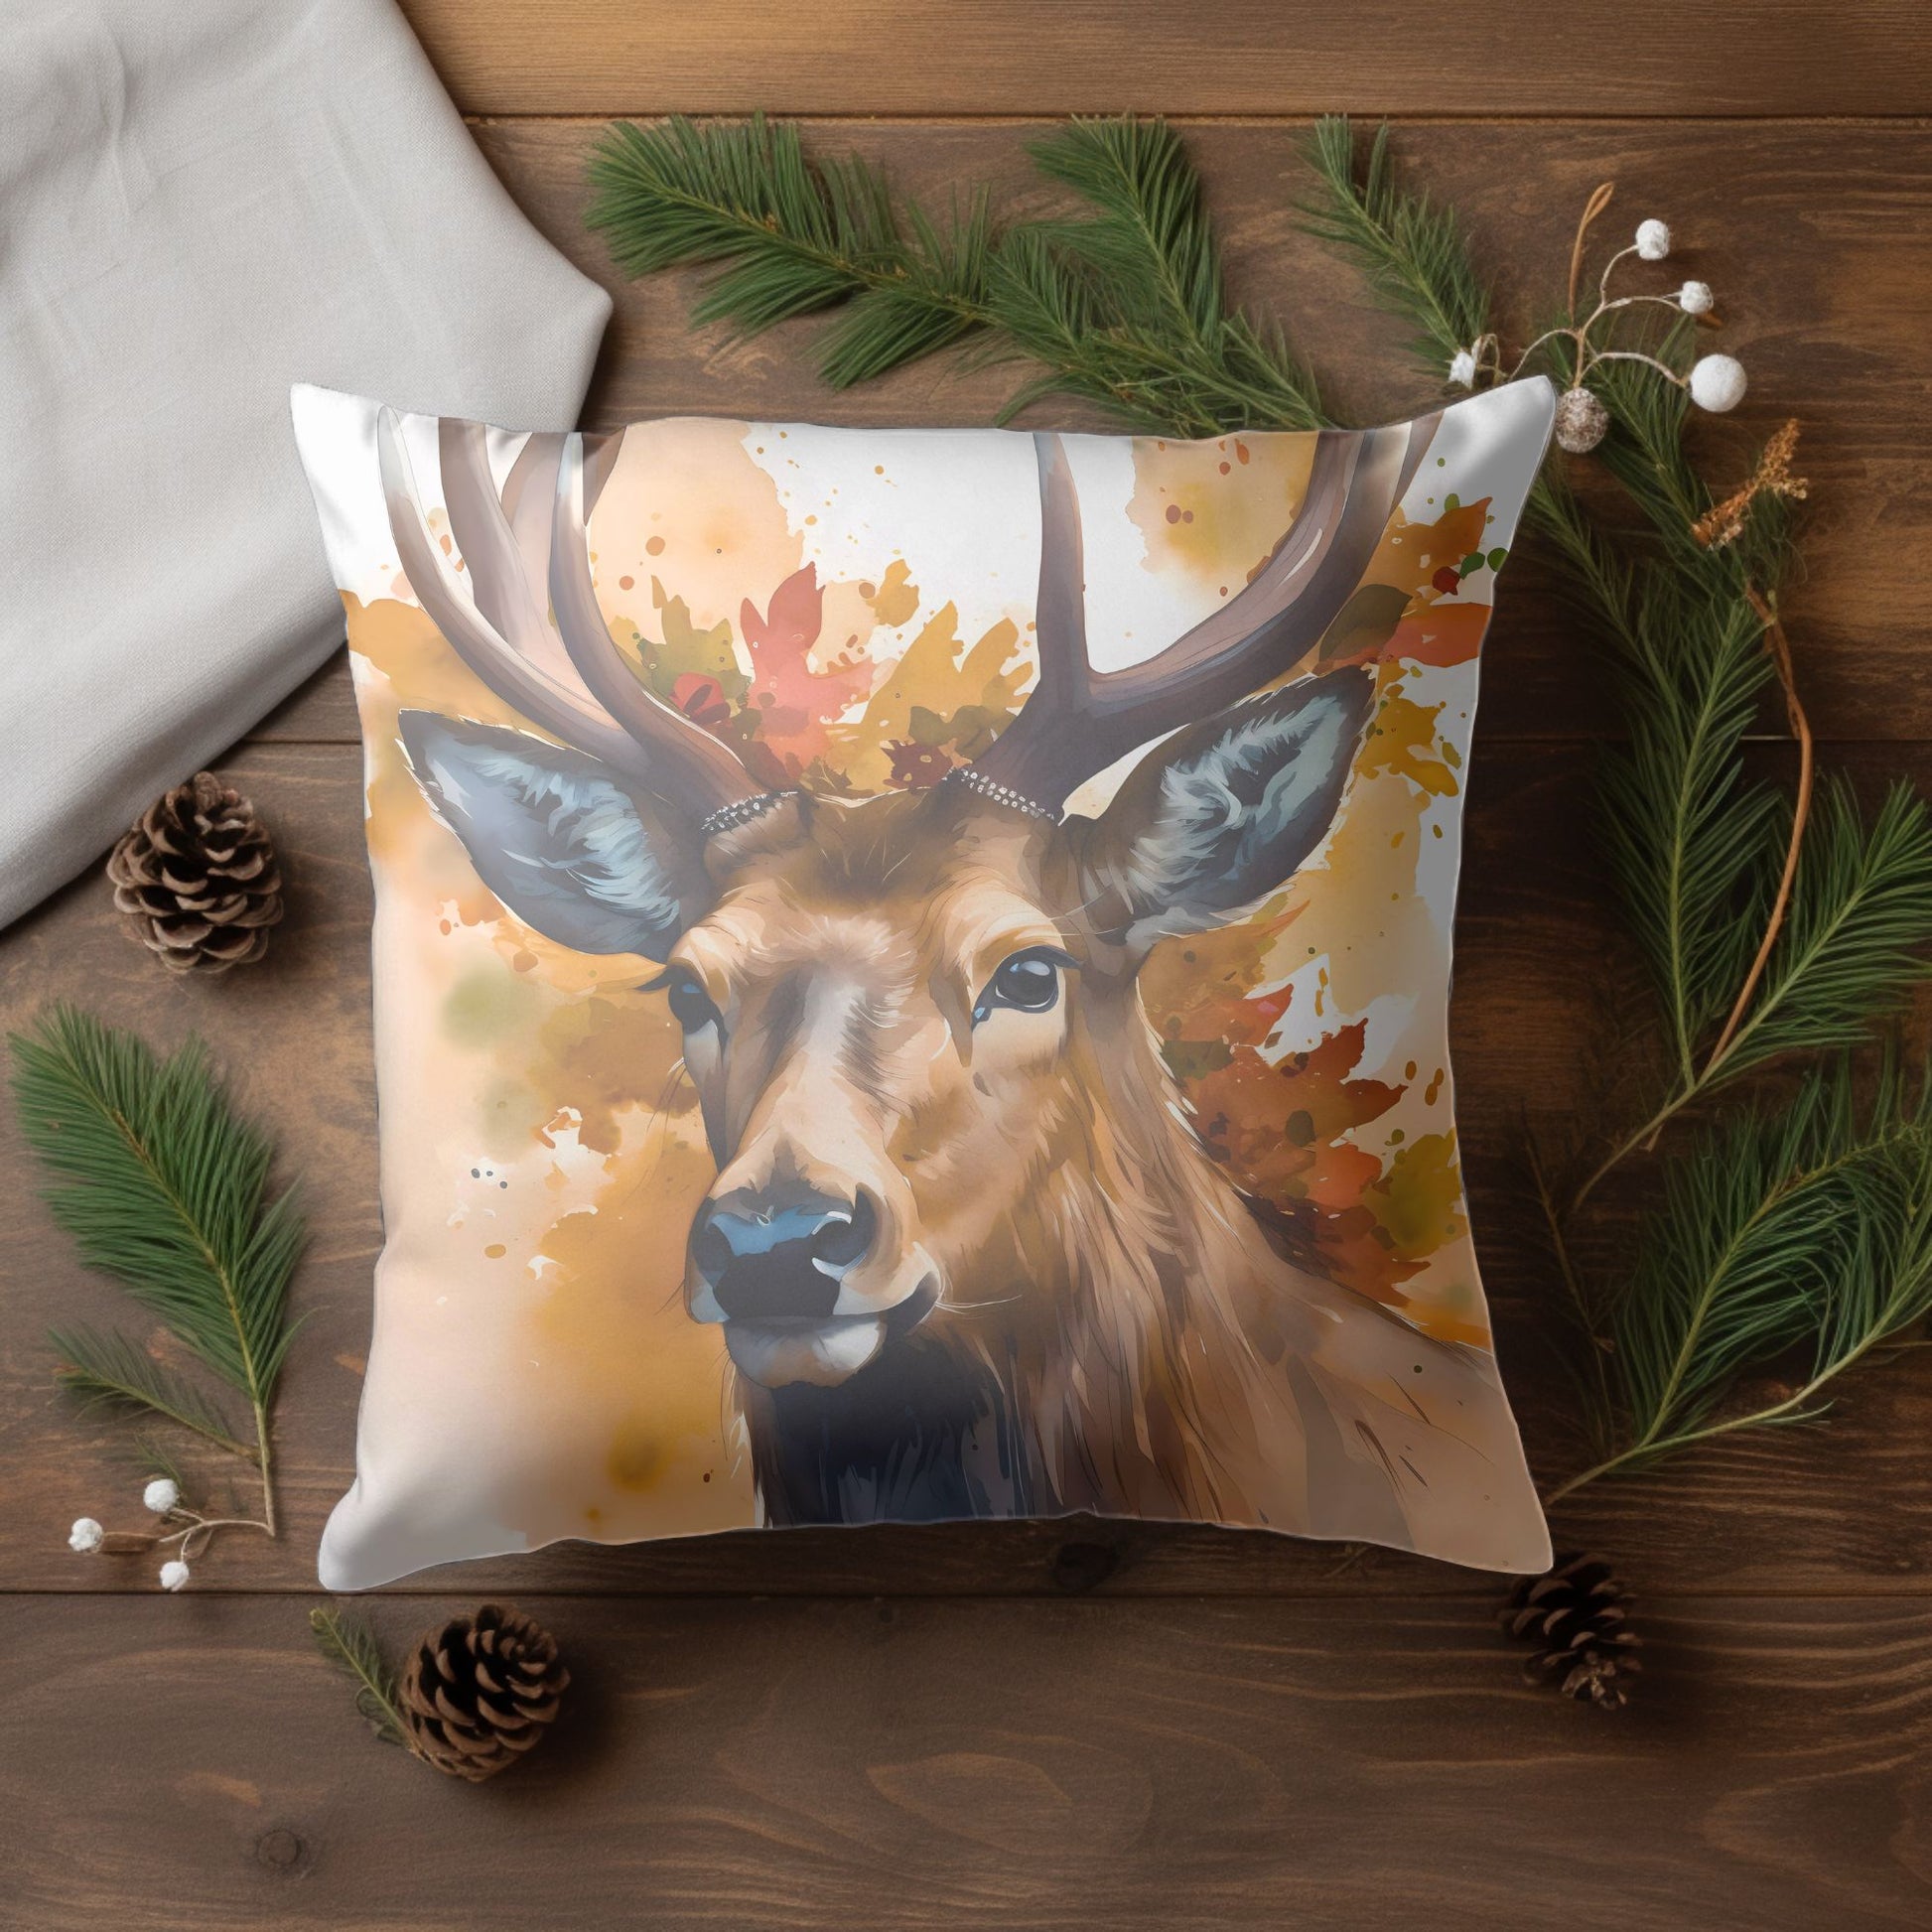 Cozy Living Room Decor with Whimsical Reindeer Pillow